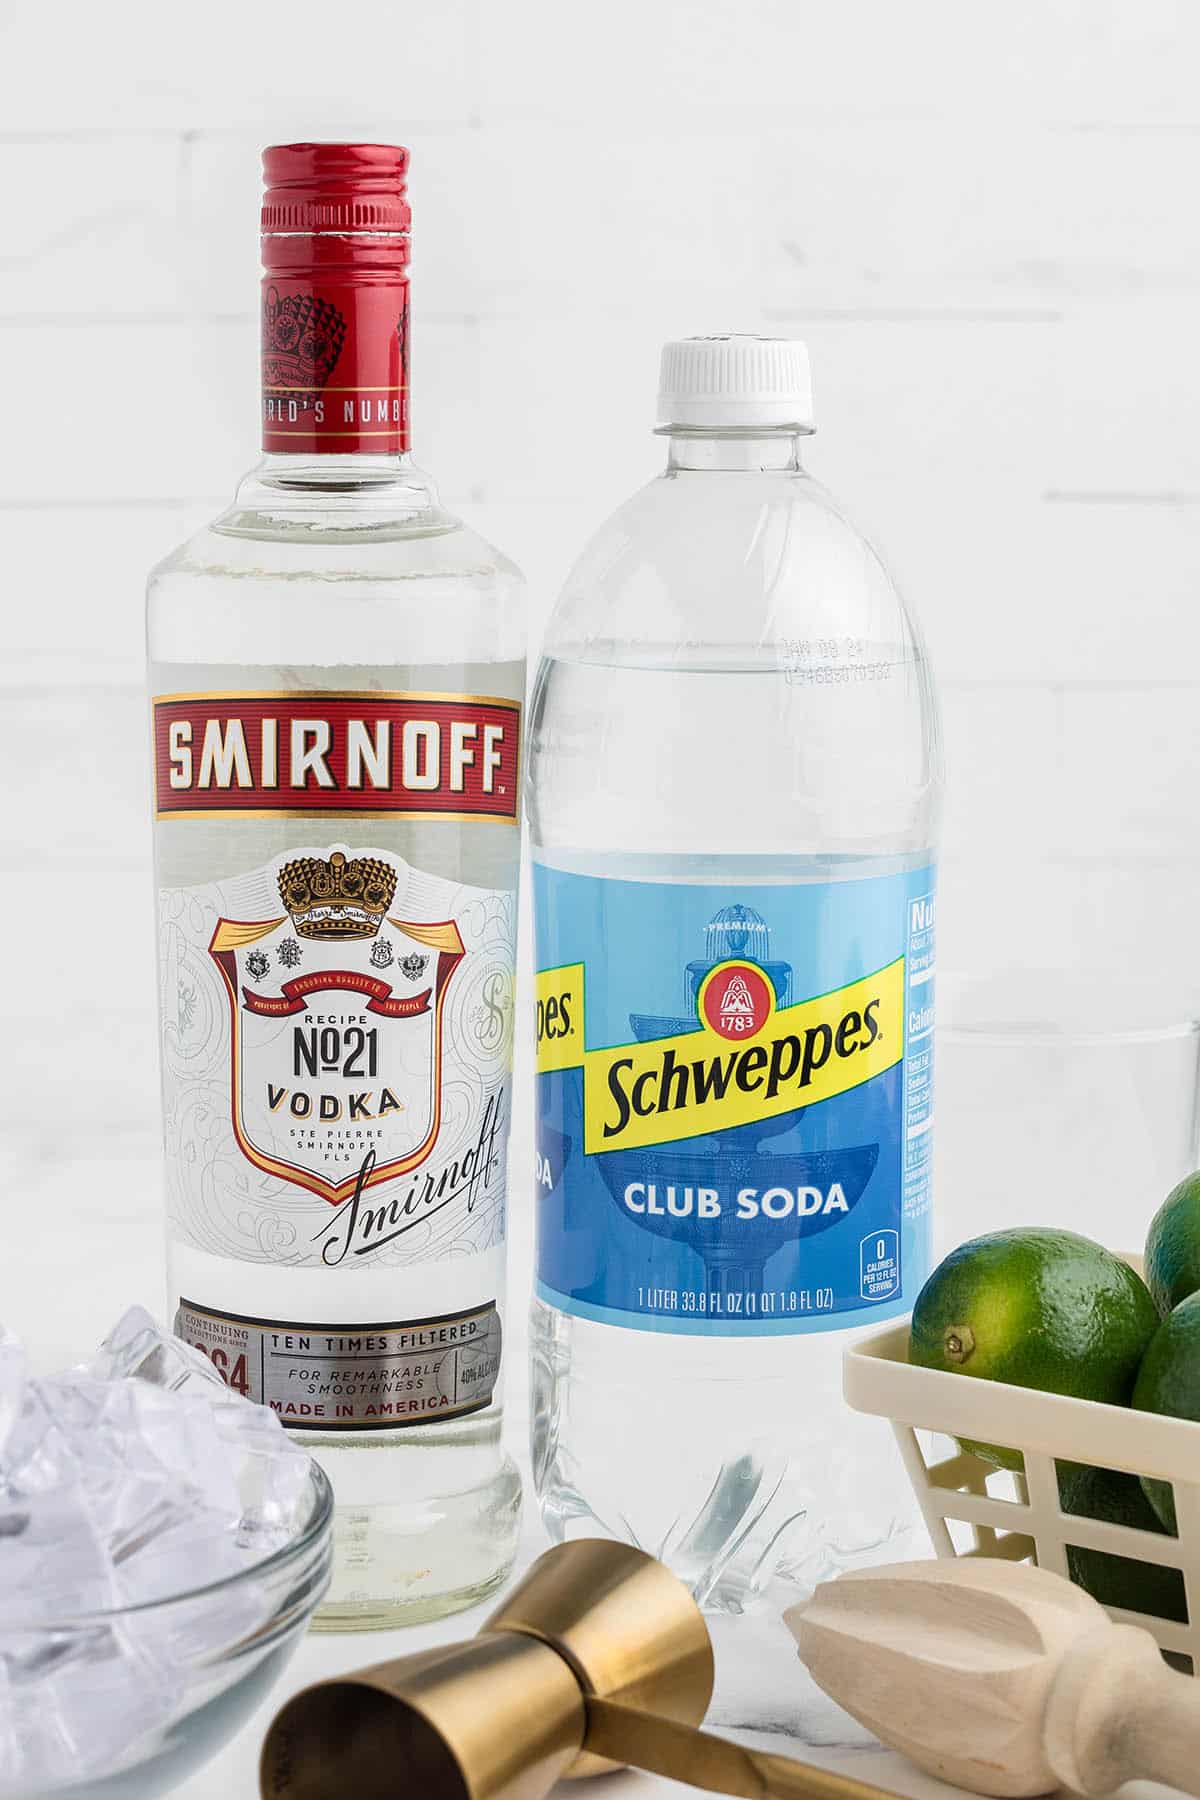 All of the ingredients you need to make the drink.